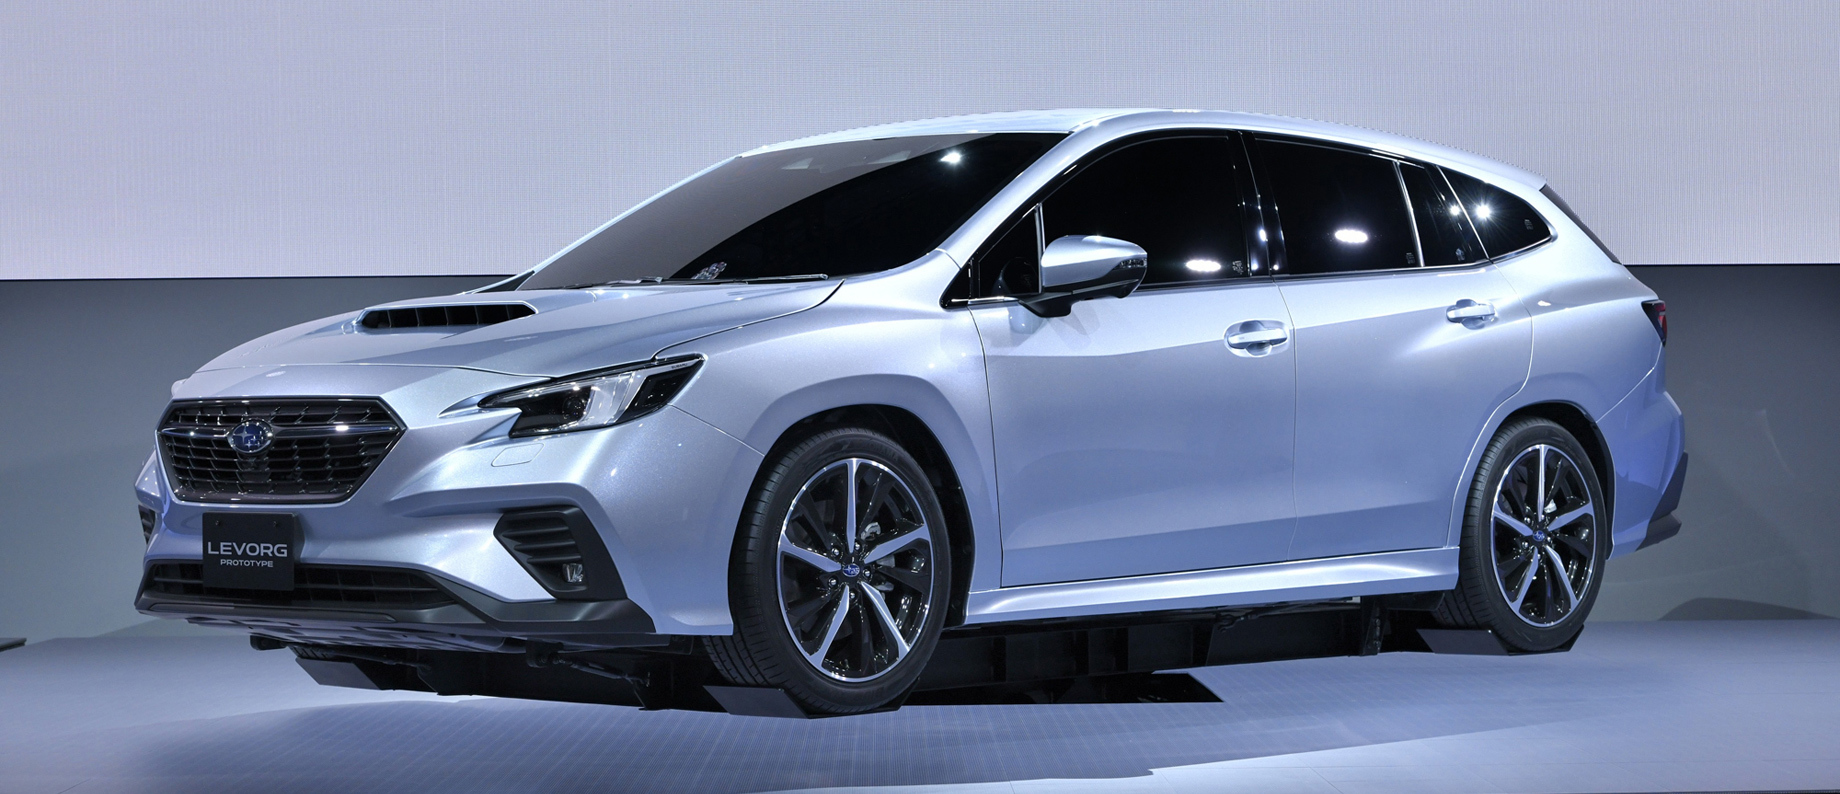 The plans of the Subaru brand until the end of 2023 are ...